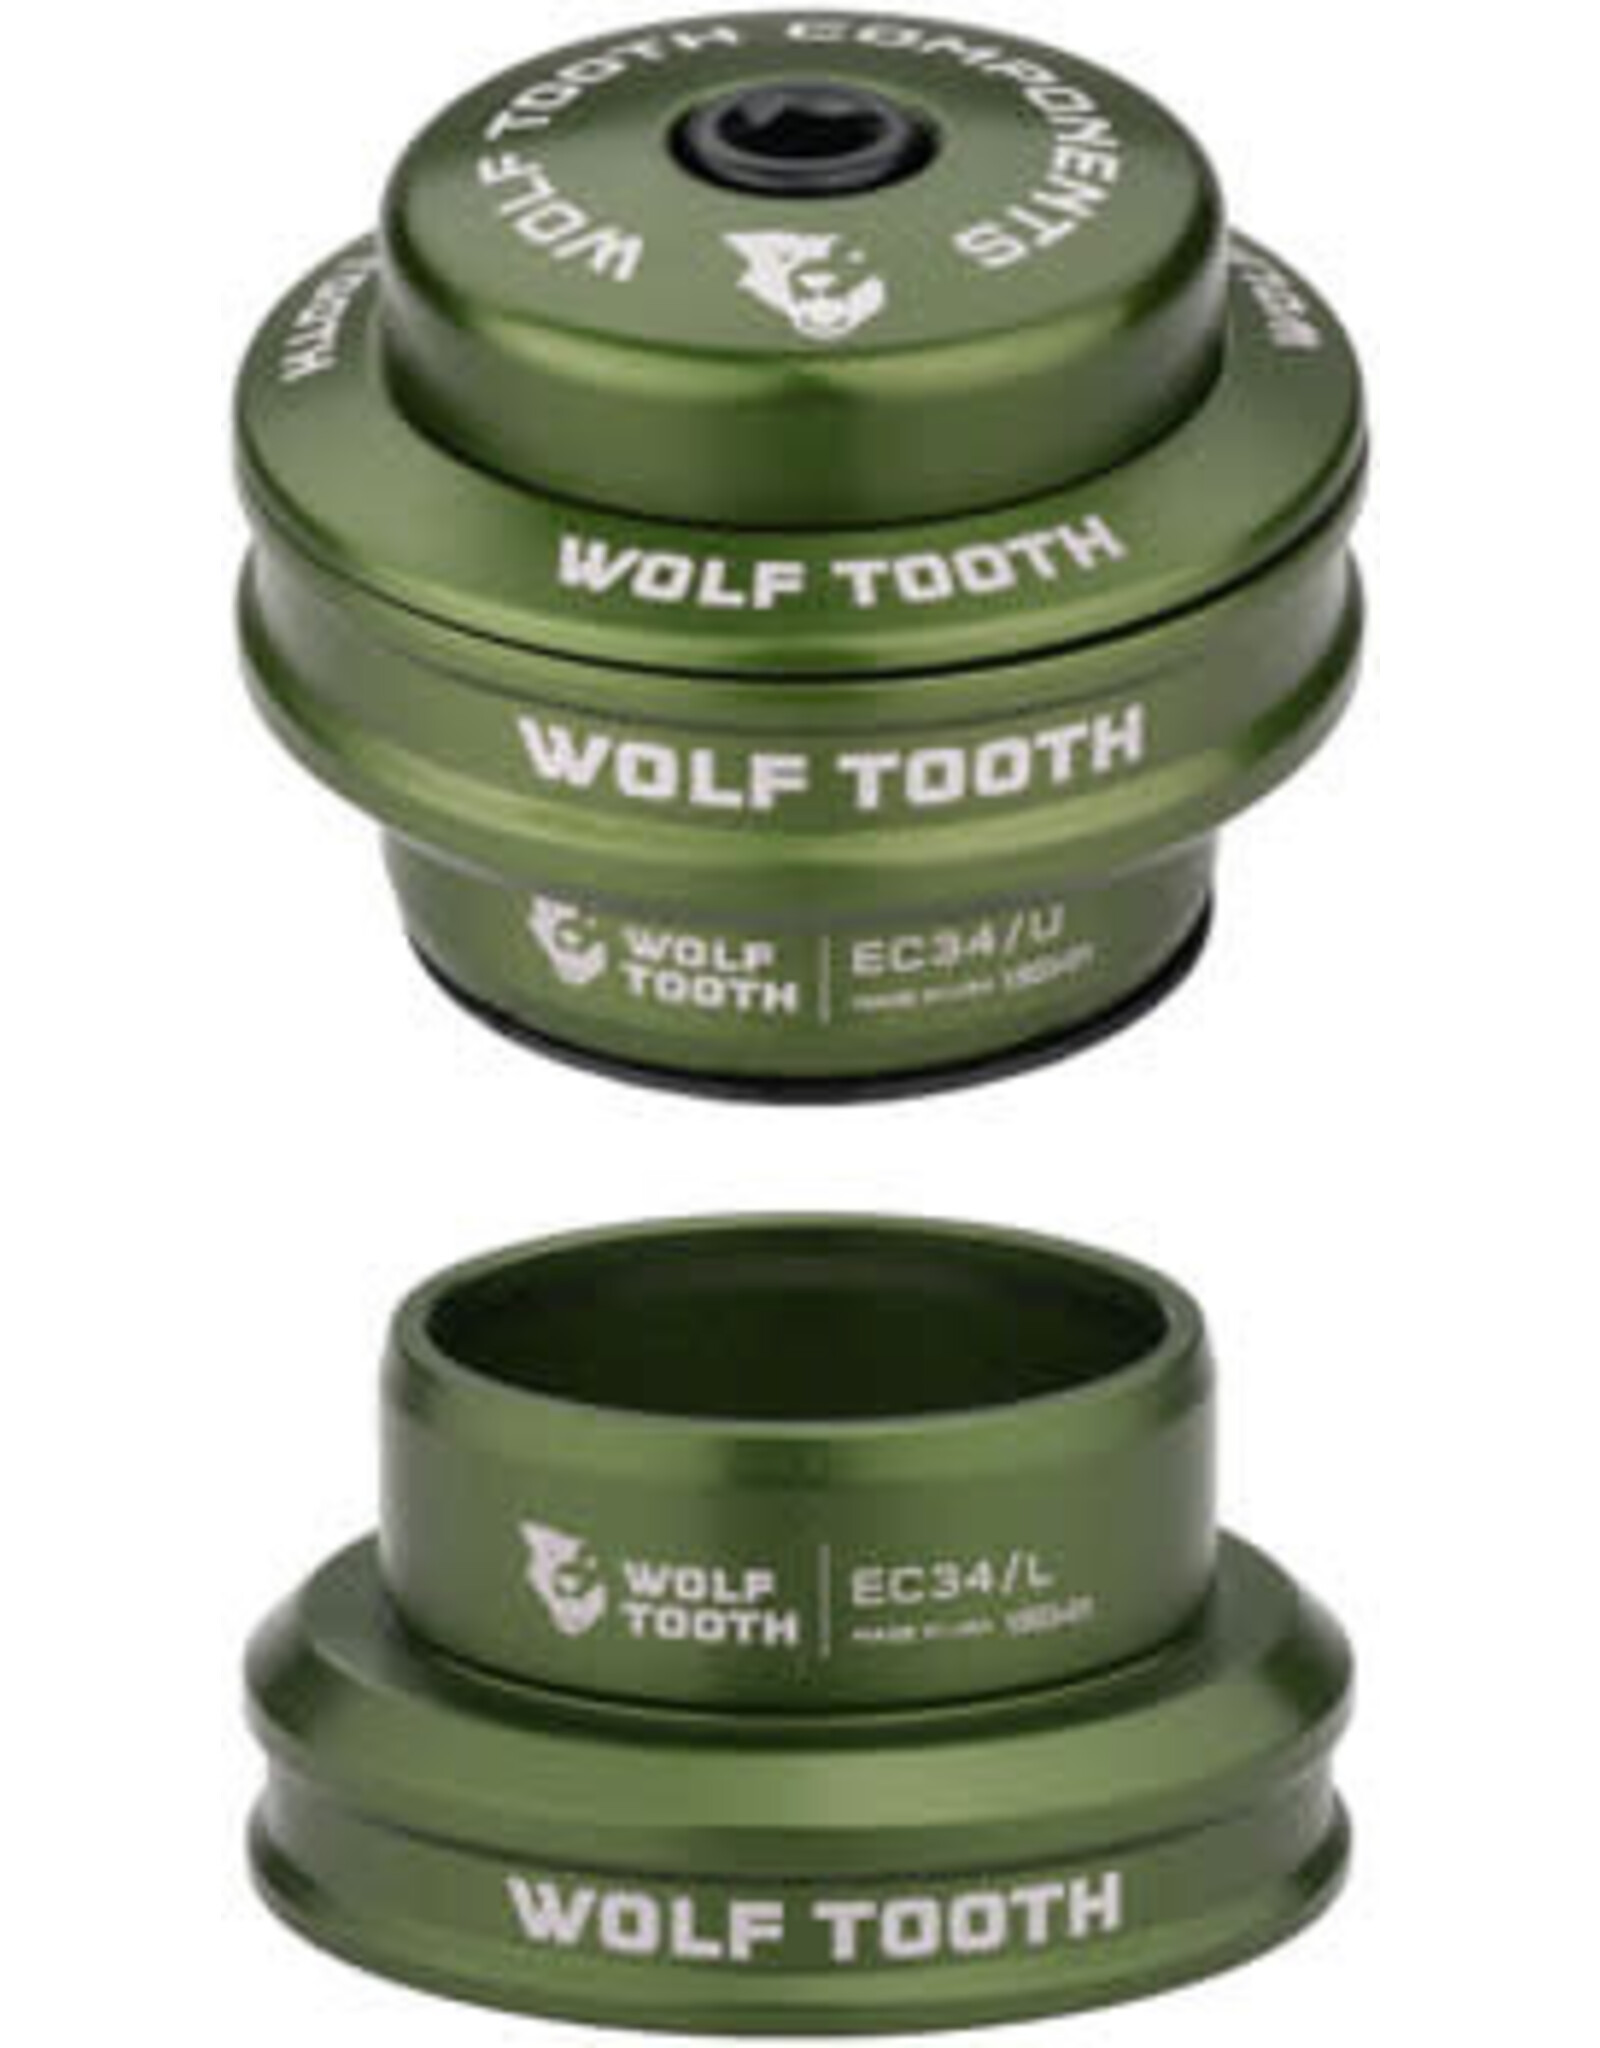 Wolf Tooth Wolf Tooth Premium Headset - EC34/EC34, Olive